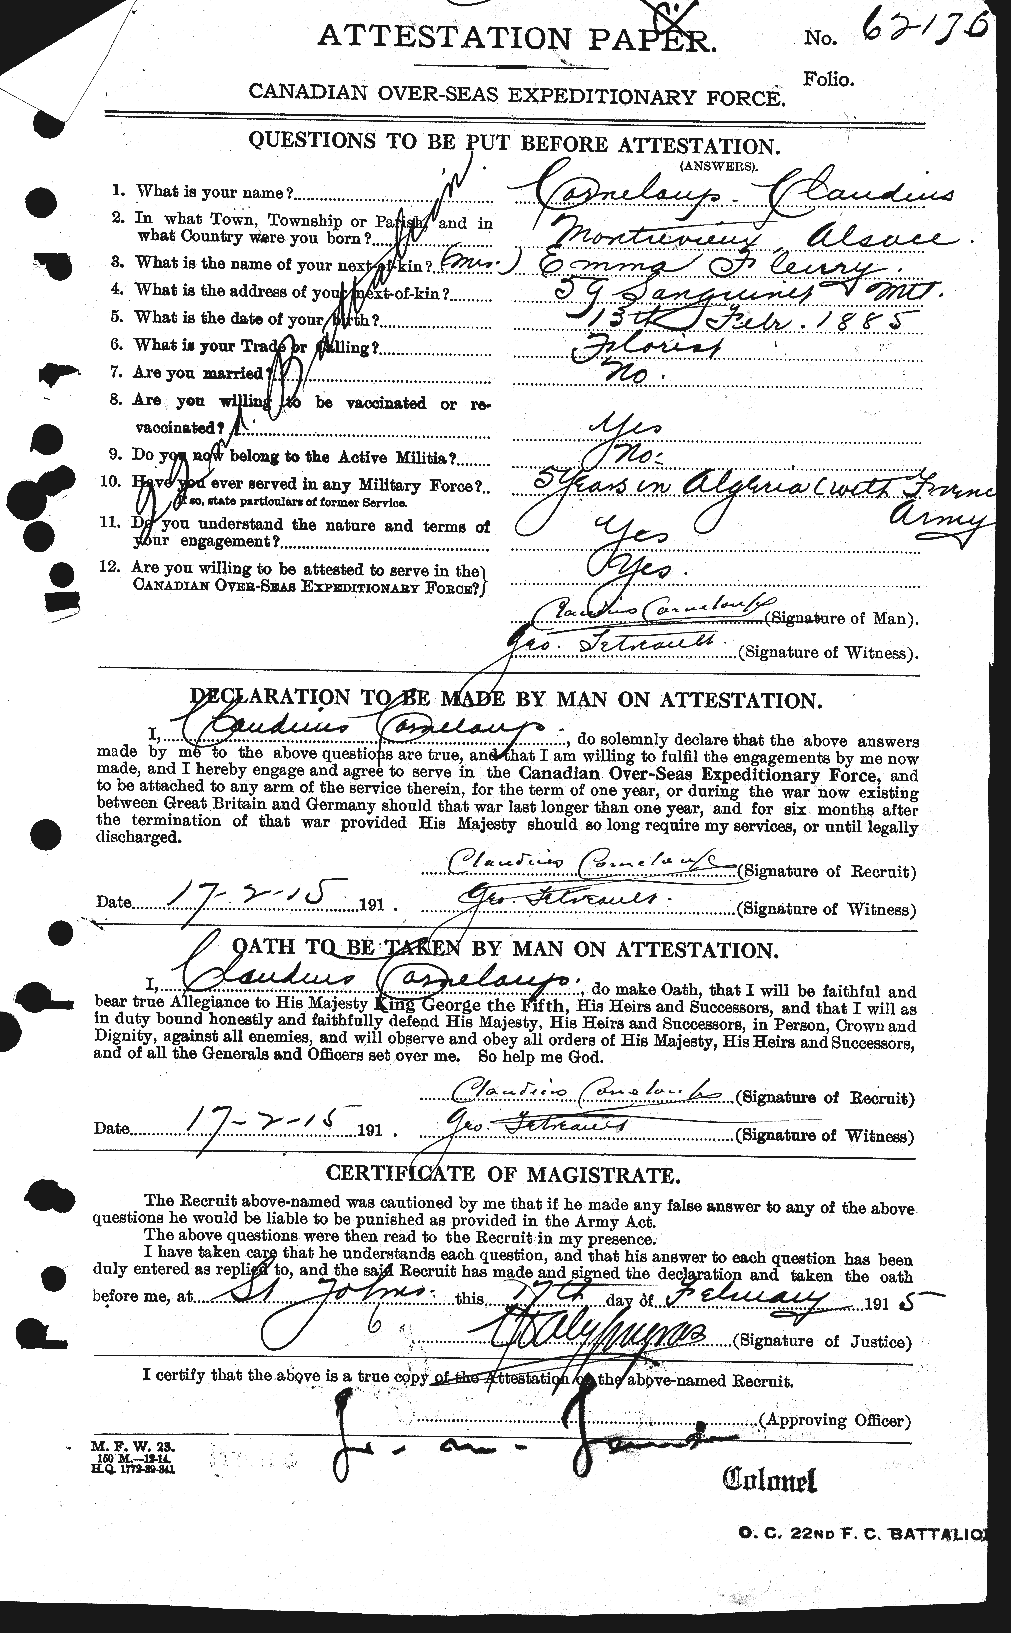 New Zealand Air Force Personnel Records